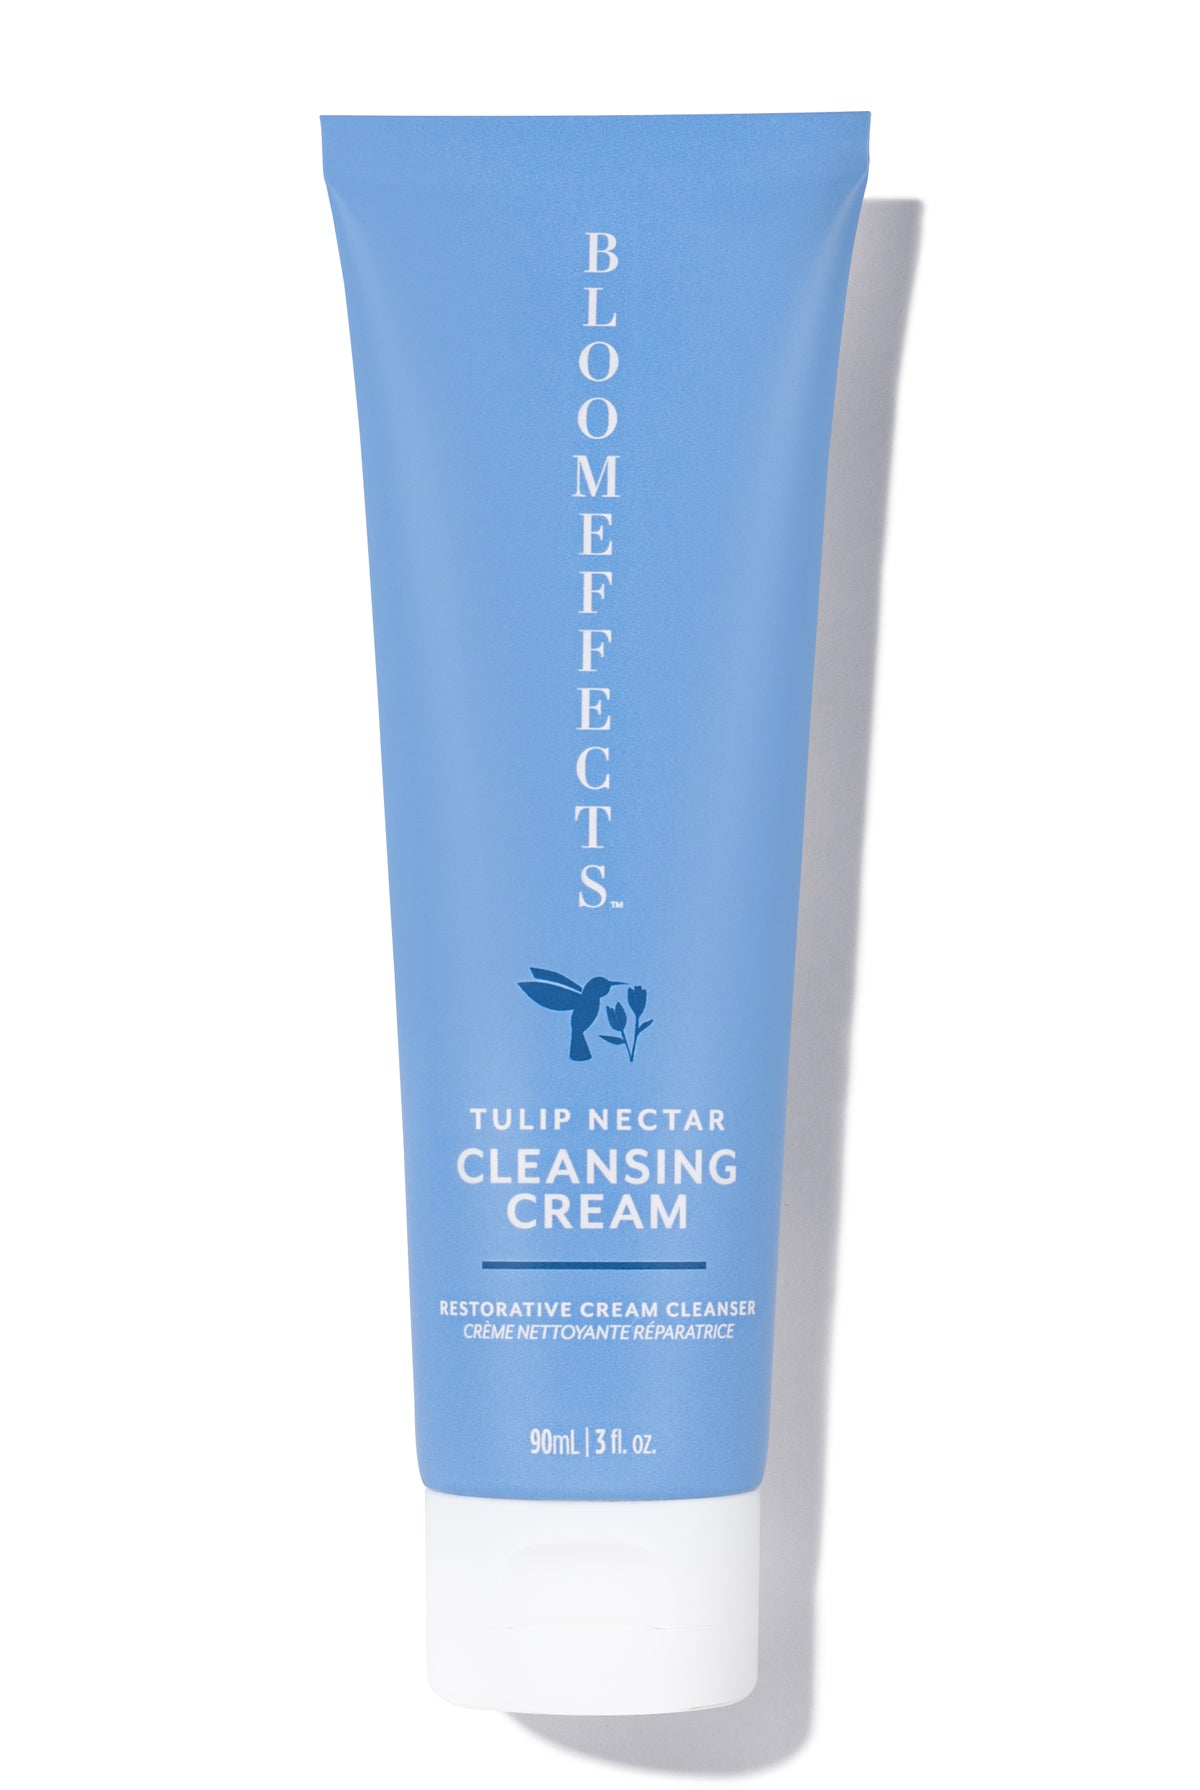 Bloomeffects TULIP NECTAR CLEANSING CREAM - 90ml